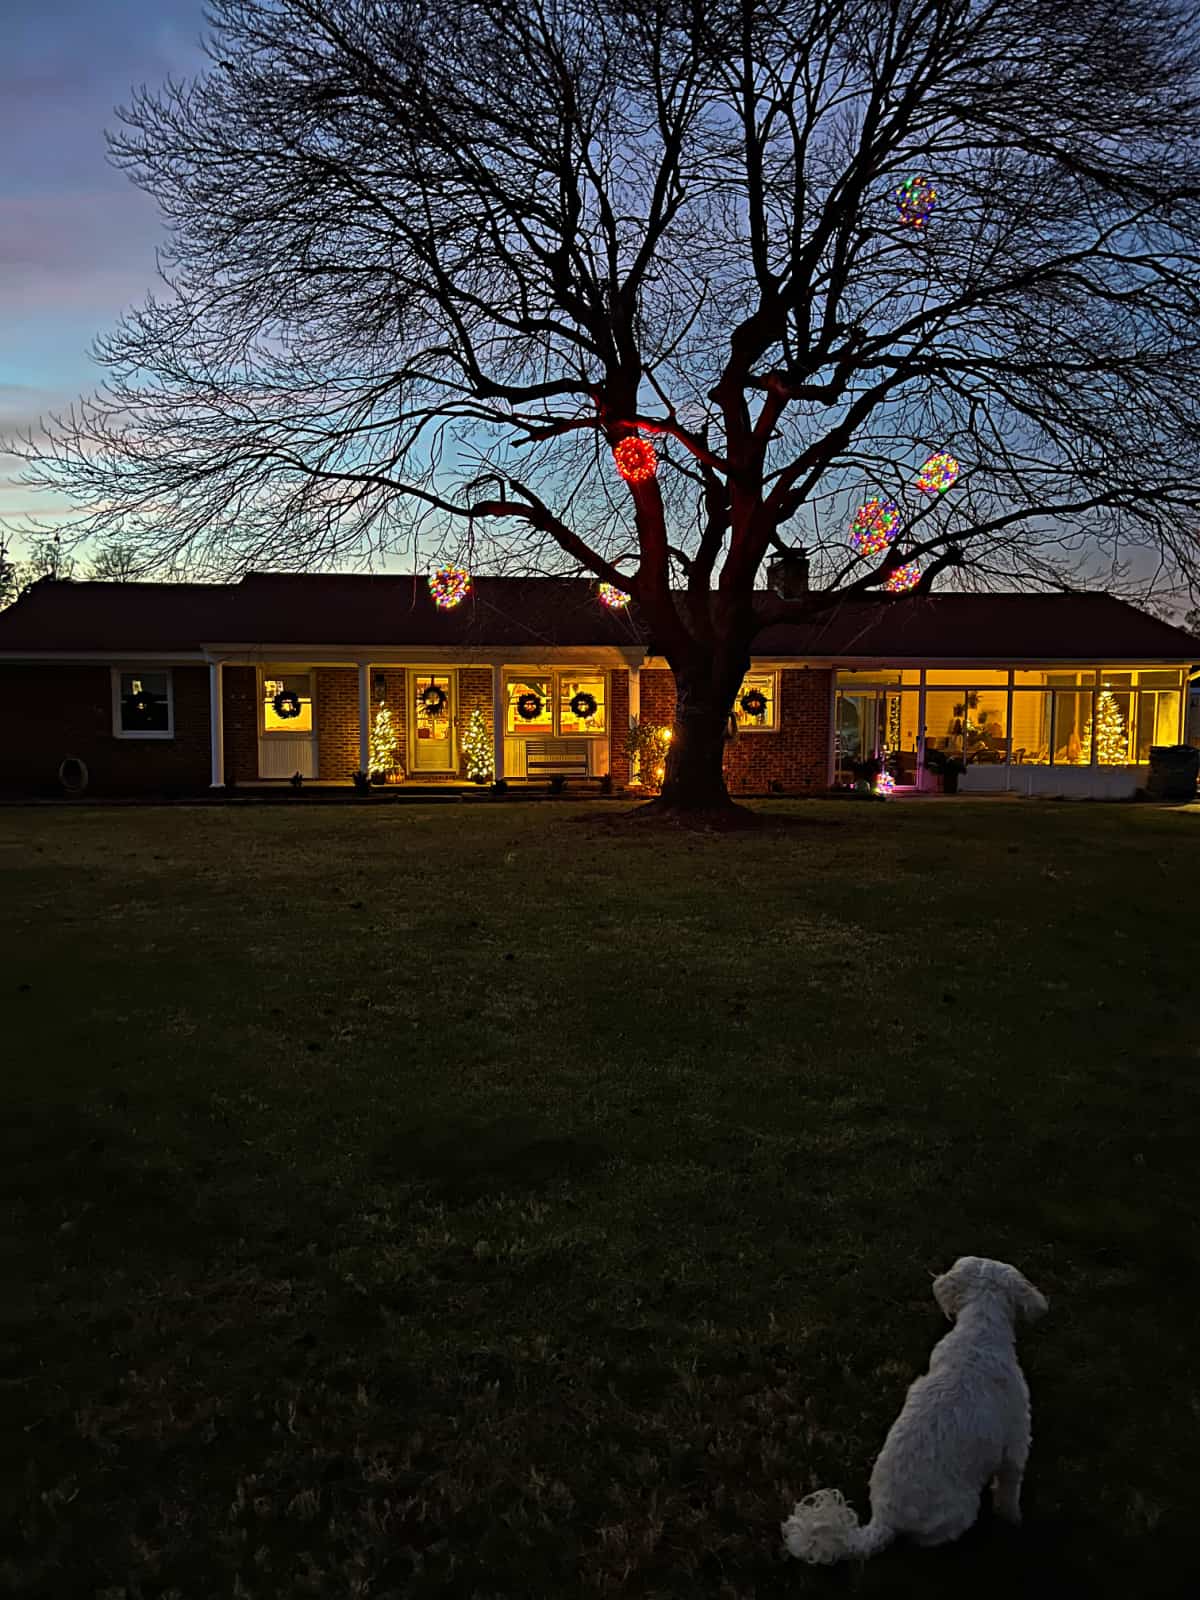 outside of house decorated with lights for Christmas